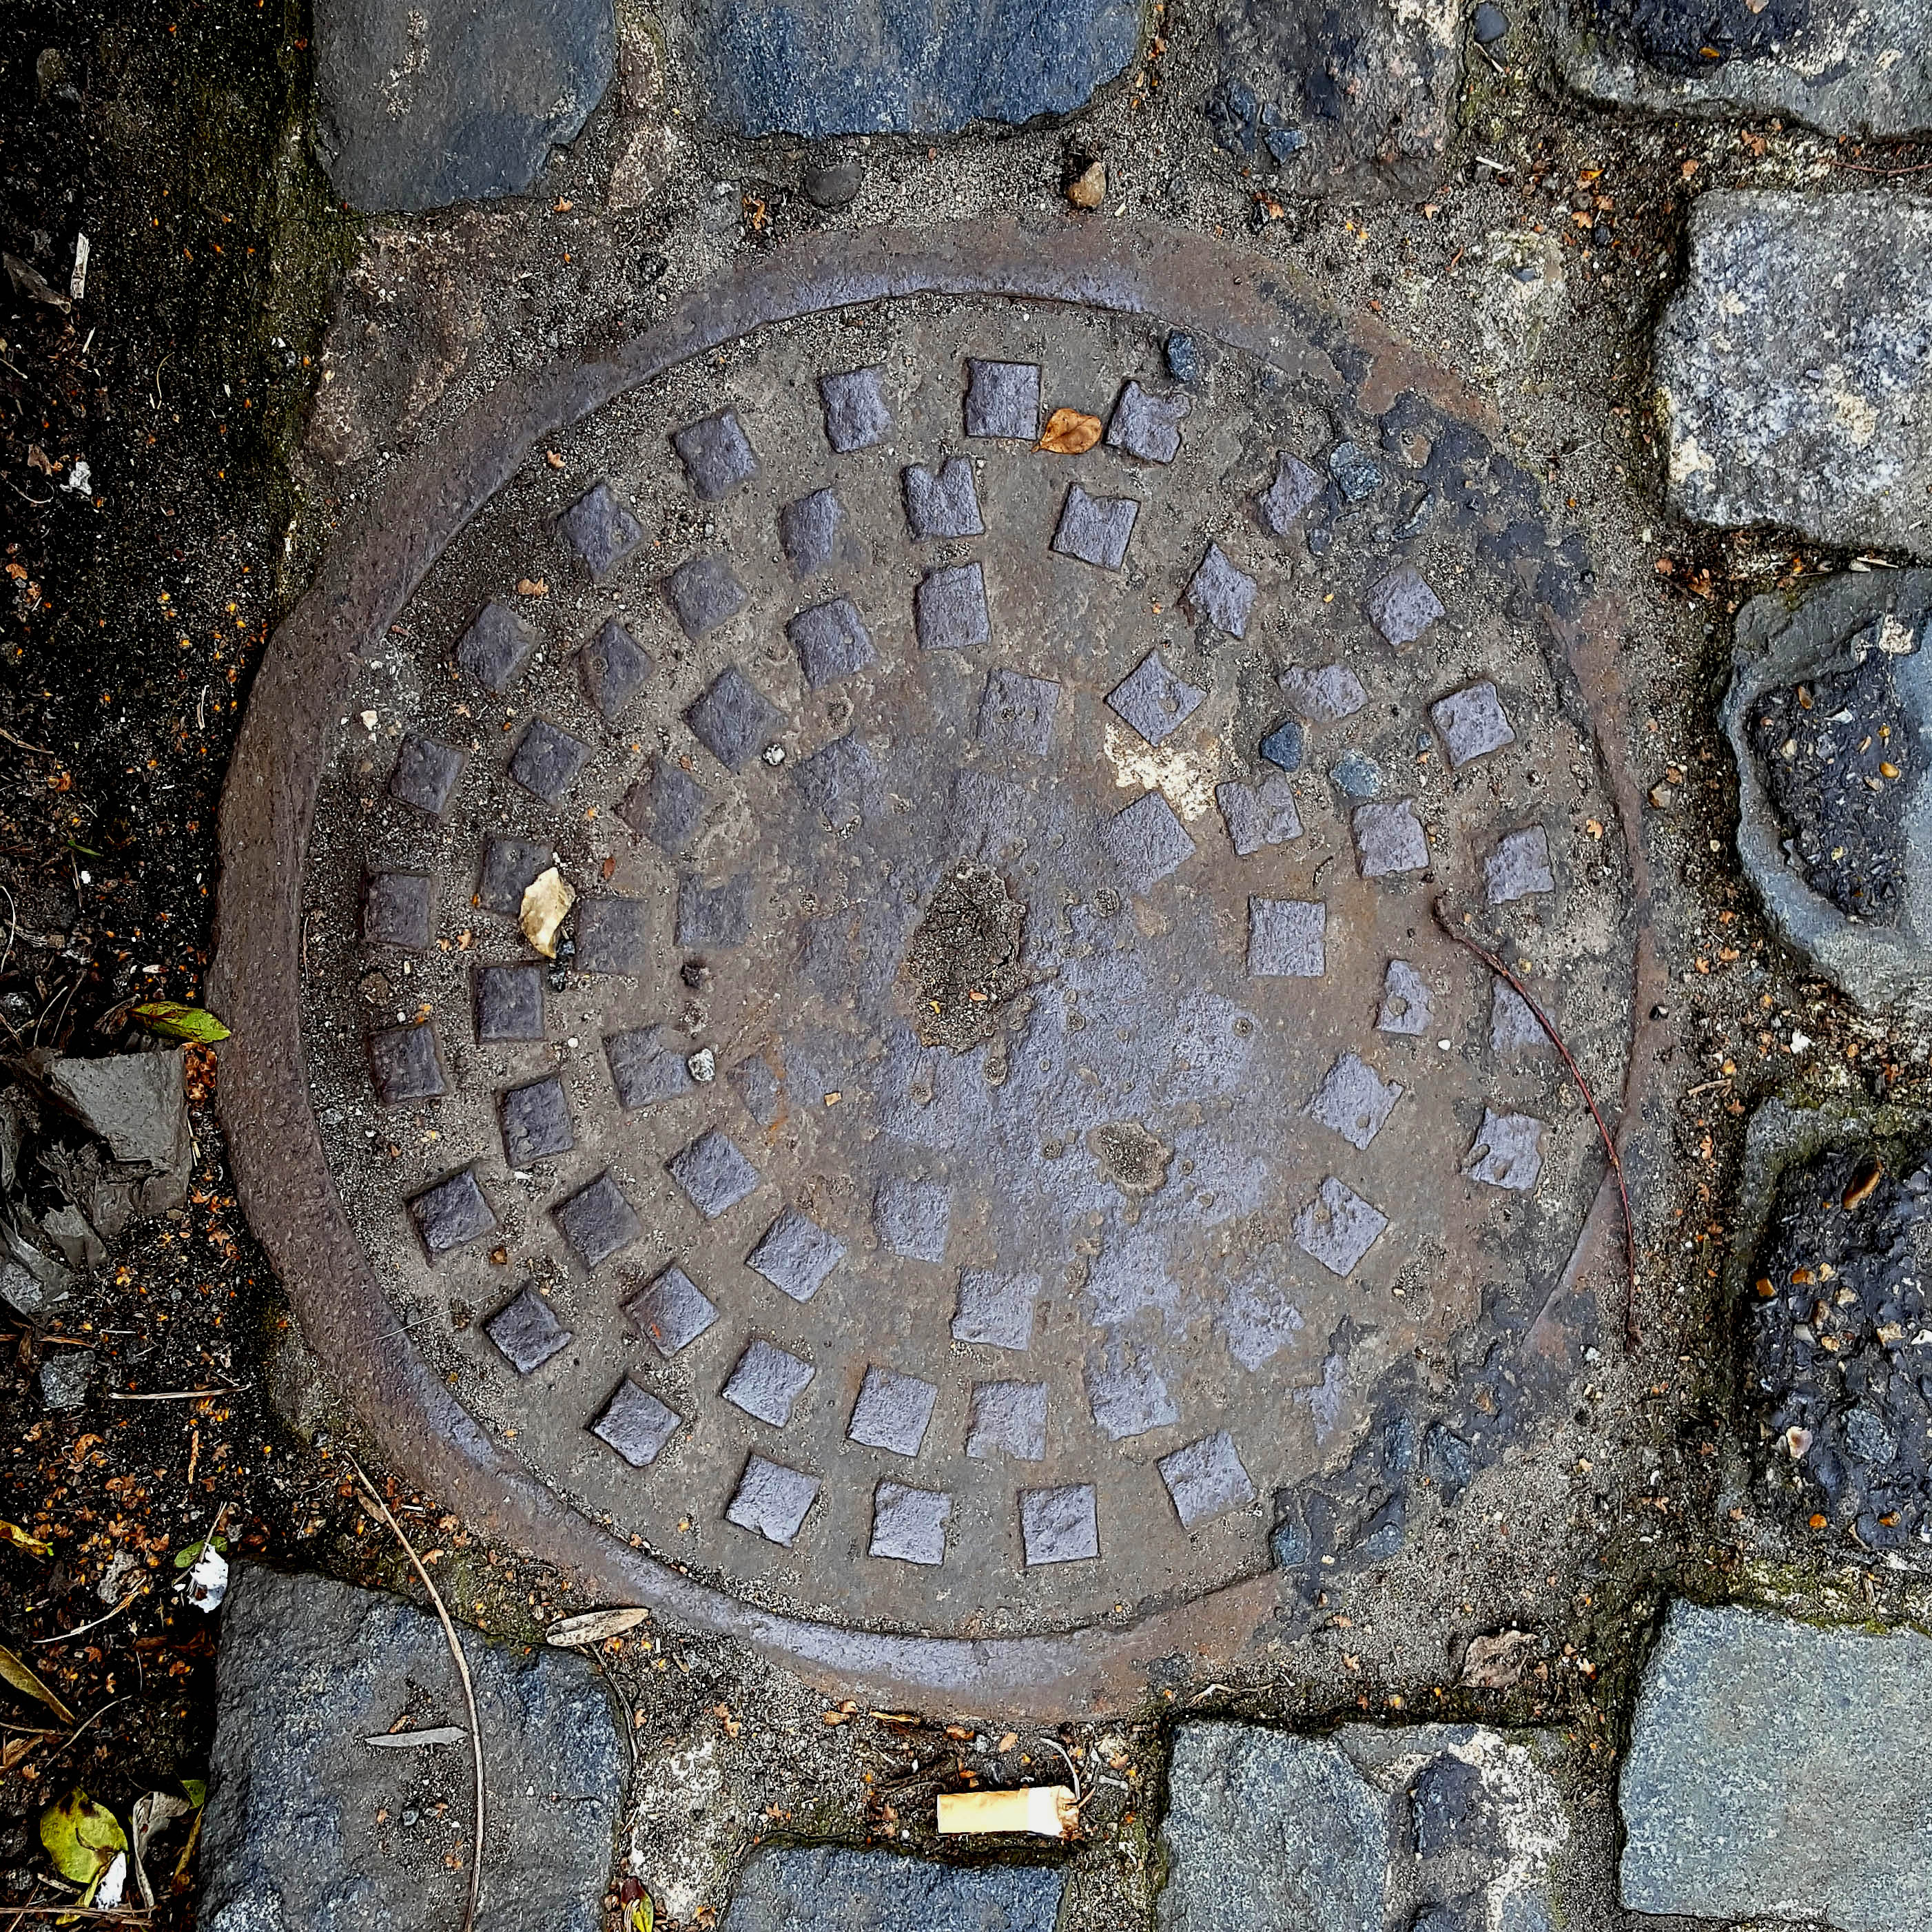 Manhole Cover, London - Cast iron with pattern of small raised squares